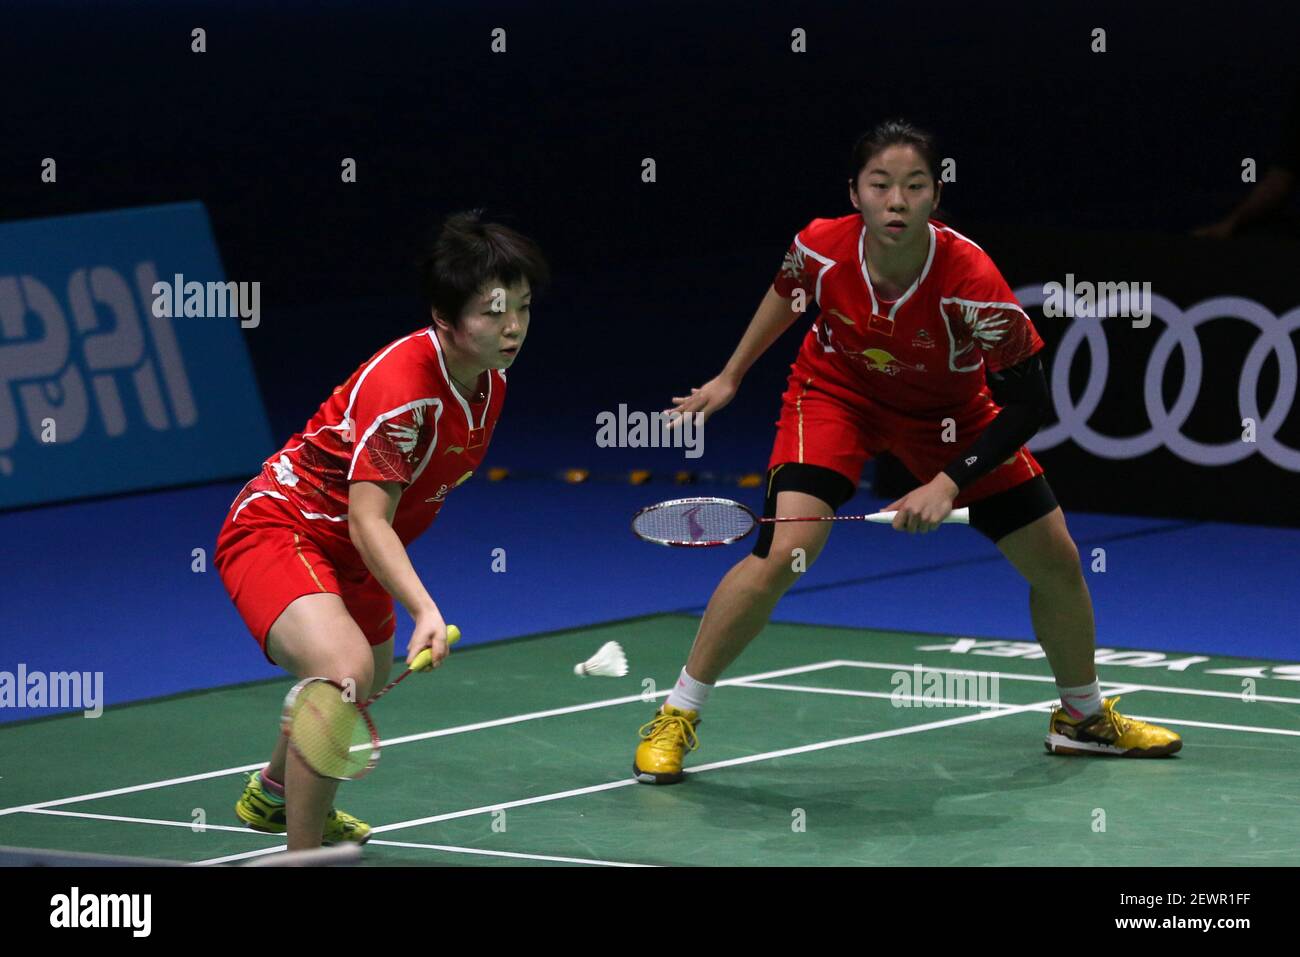 161218) -- DUBAI , Dec. 18, 2016 (Xinhua) -- Chen Qingchen(L) and Jia Yifan  of China compete during the women's doubles final against Misaki Matsutomo  and Ayaka Takahashi of Japan in the